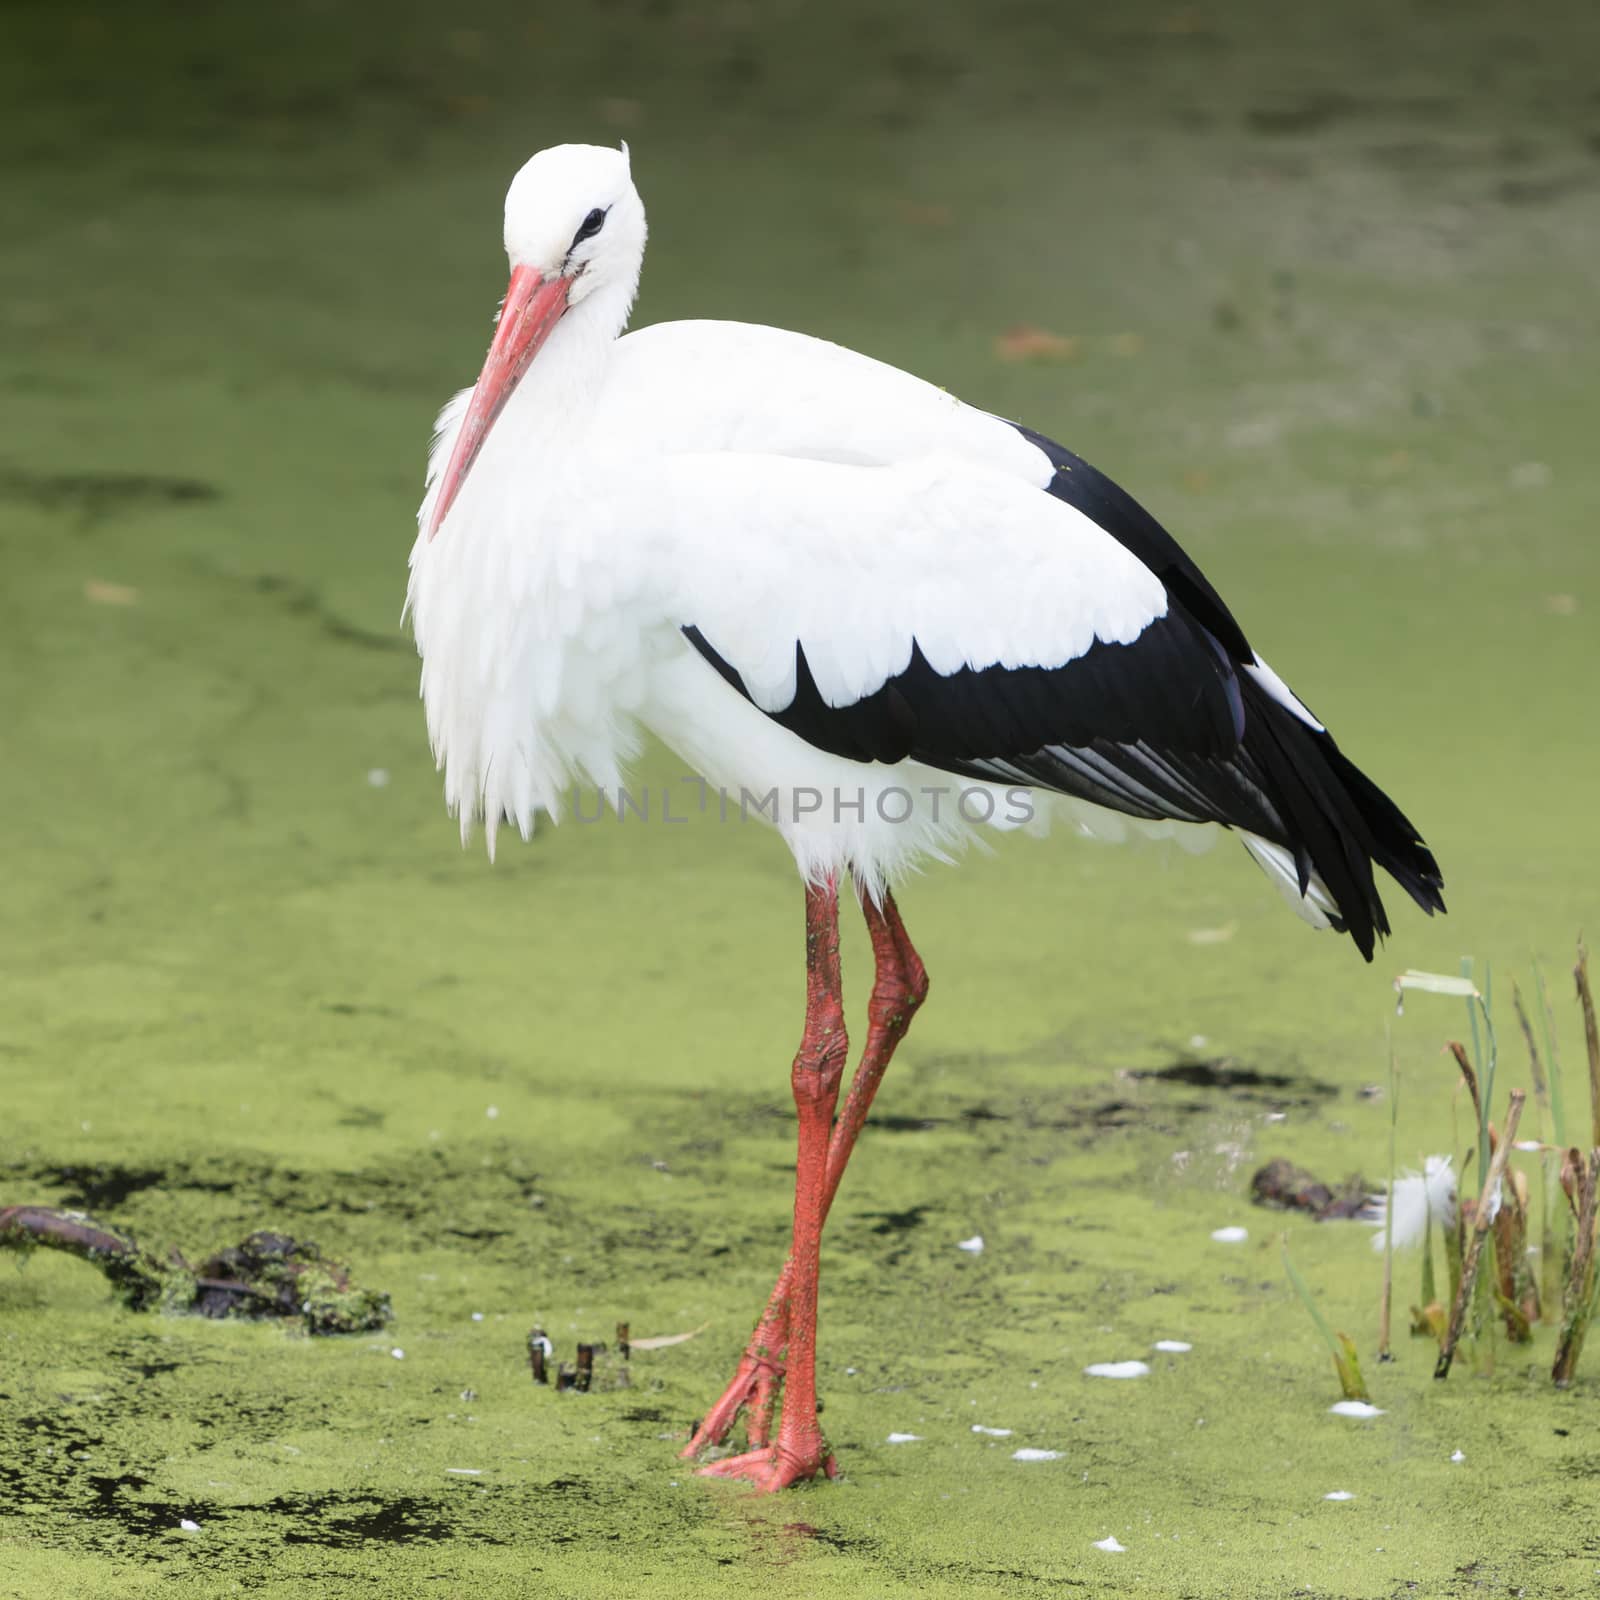 Stork walking in a pond filled with duckweed by michaklootwijk